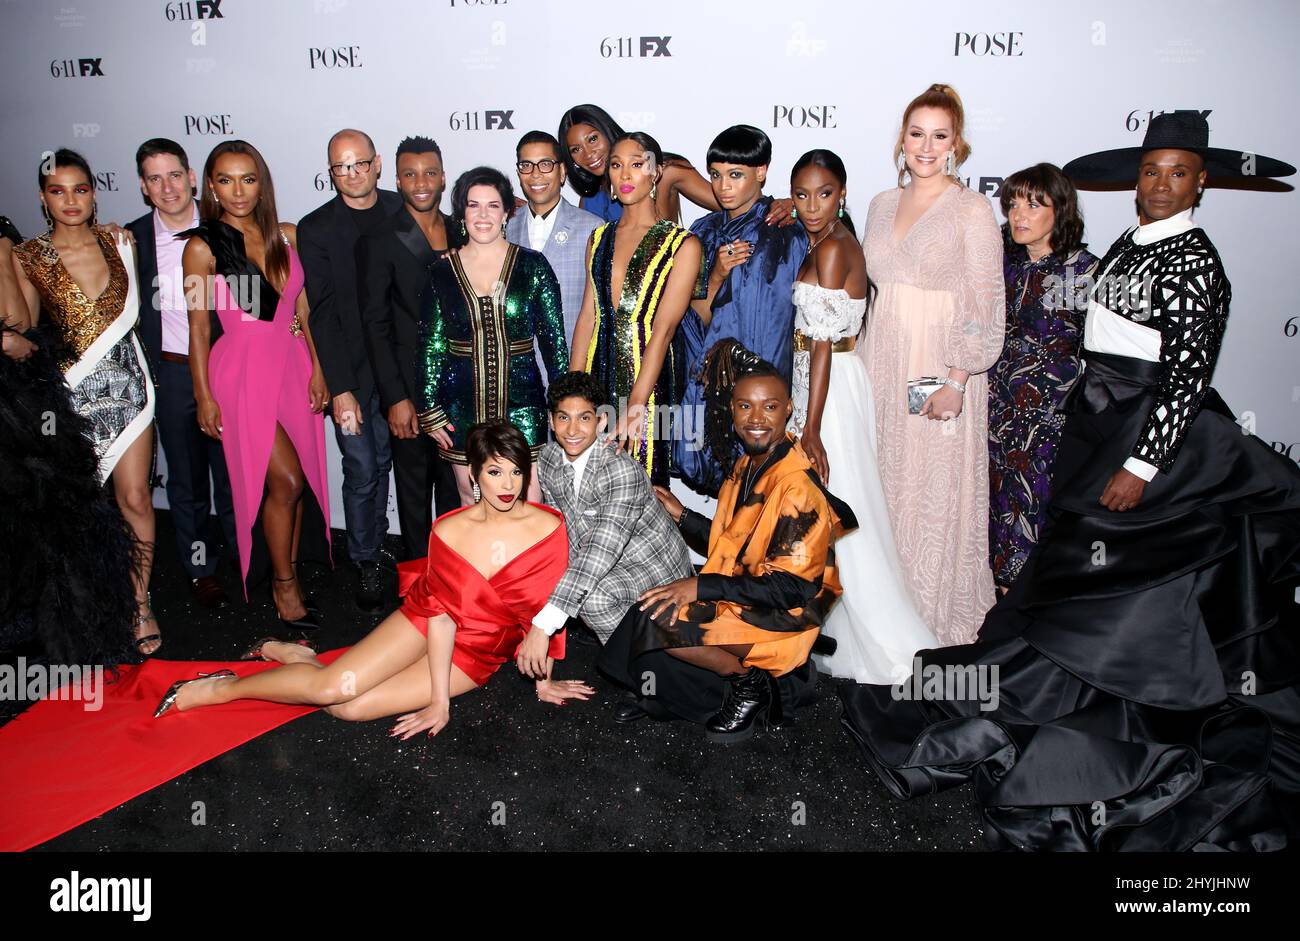 Ryan Murphy's 'Pose' Casts Record Number of Trans Actors for '80s NYC Drama